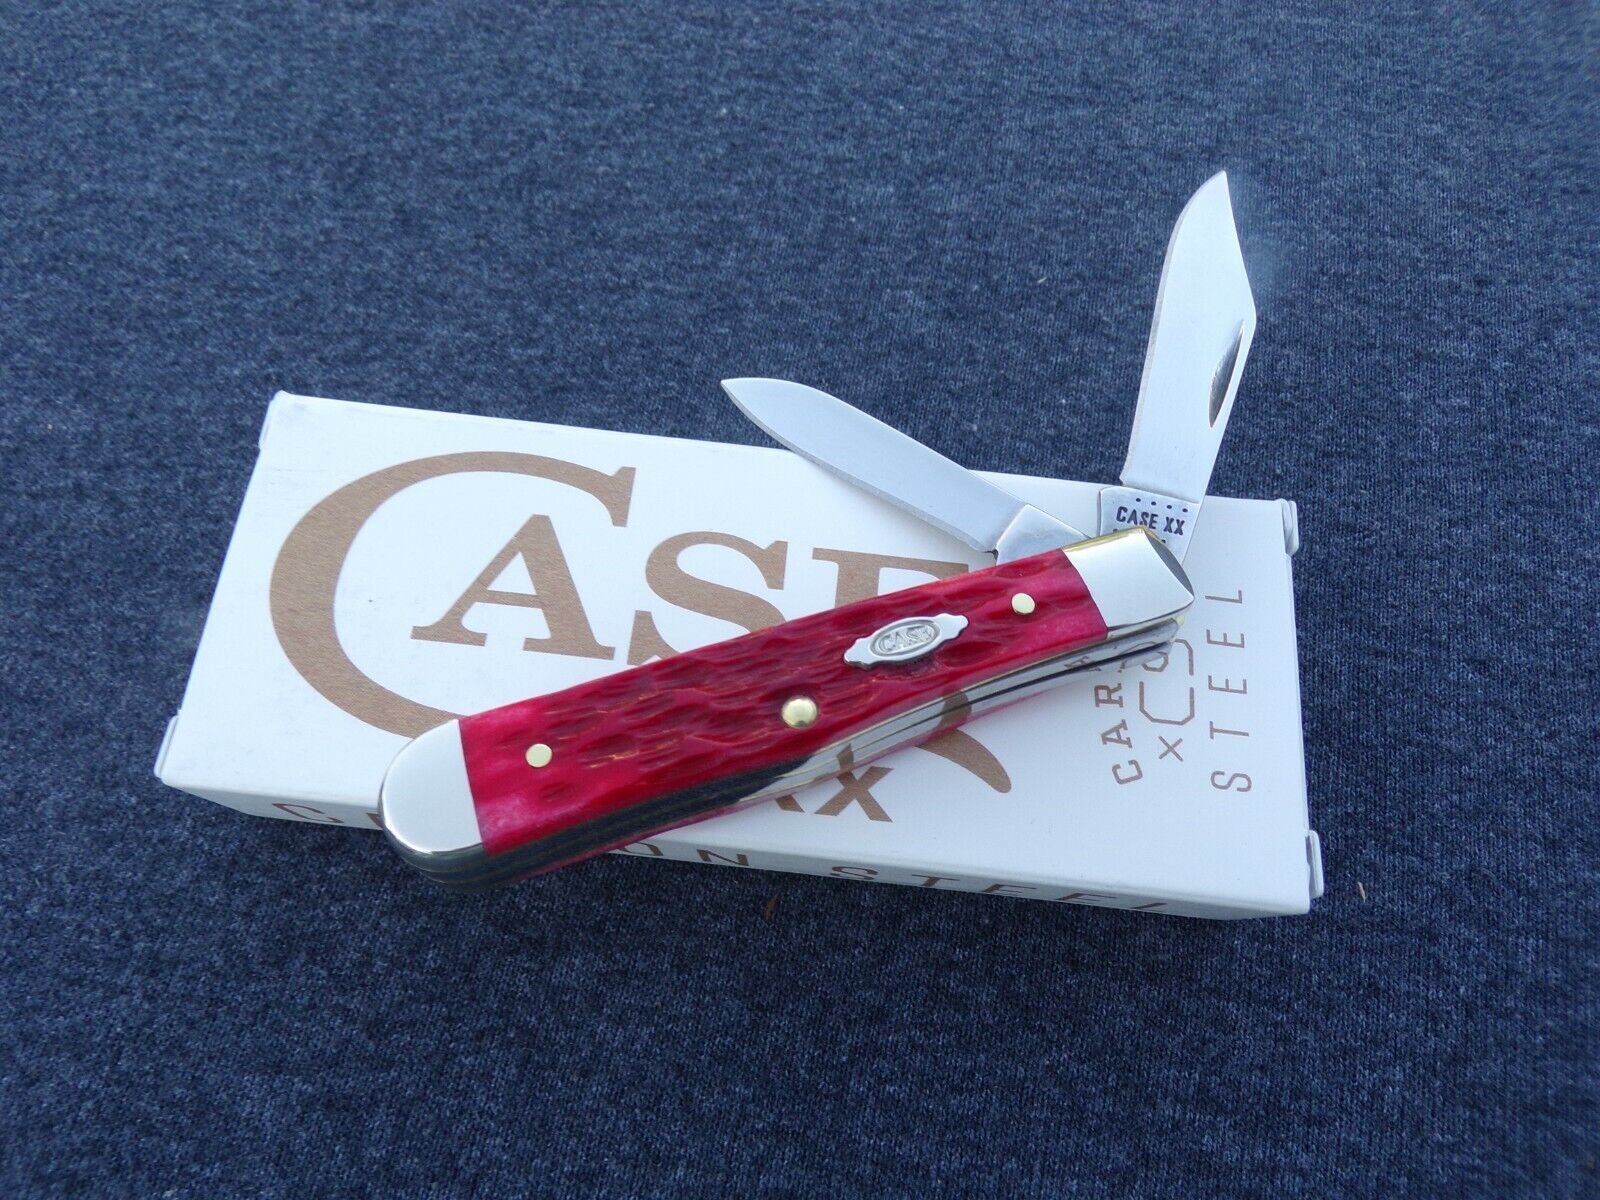 CASE XX *a 2022 DARK RED SMALL SWELL CENTER JACK KNIFE KNIVES CS